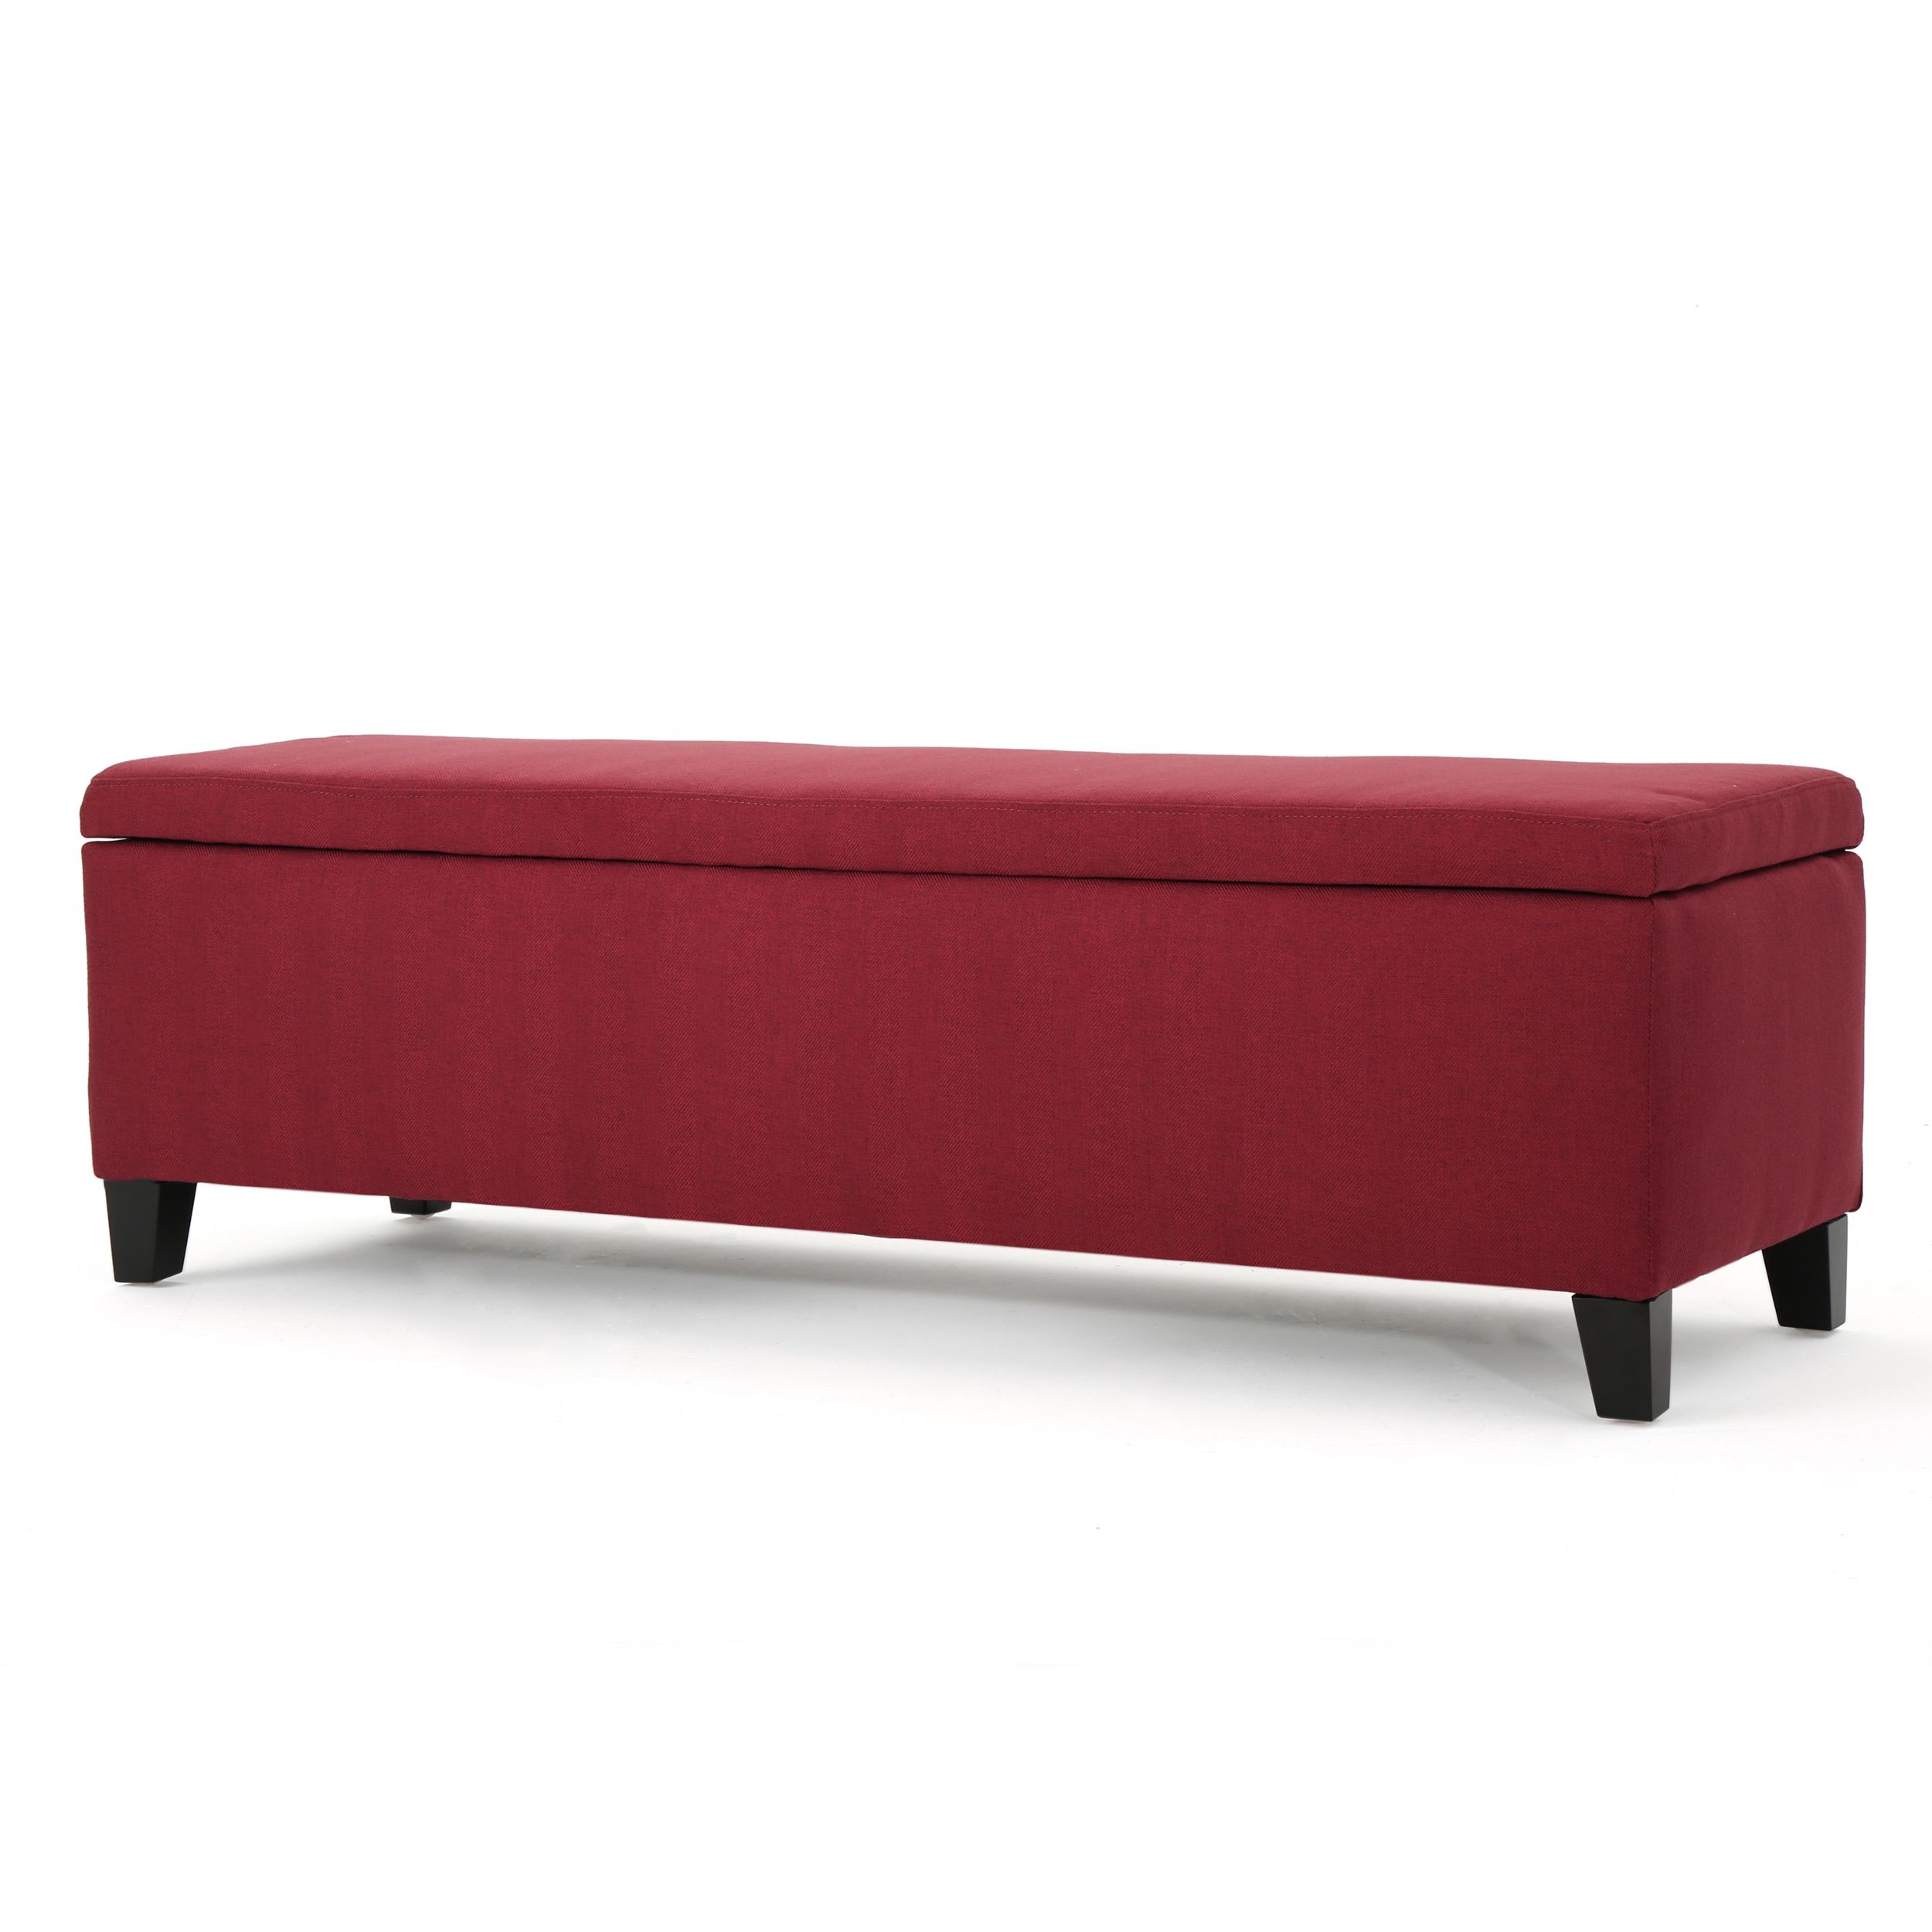 Colby Fabric Storage Ottoman, Deep Red – Walmart – Walmart With Regard To Red Fabric Square Storage Ottomans With Pillows (View 9 of 20)